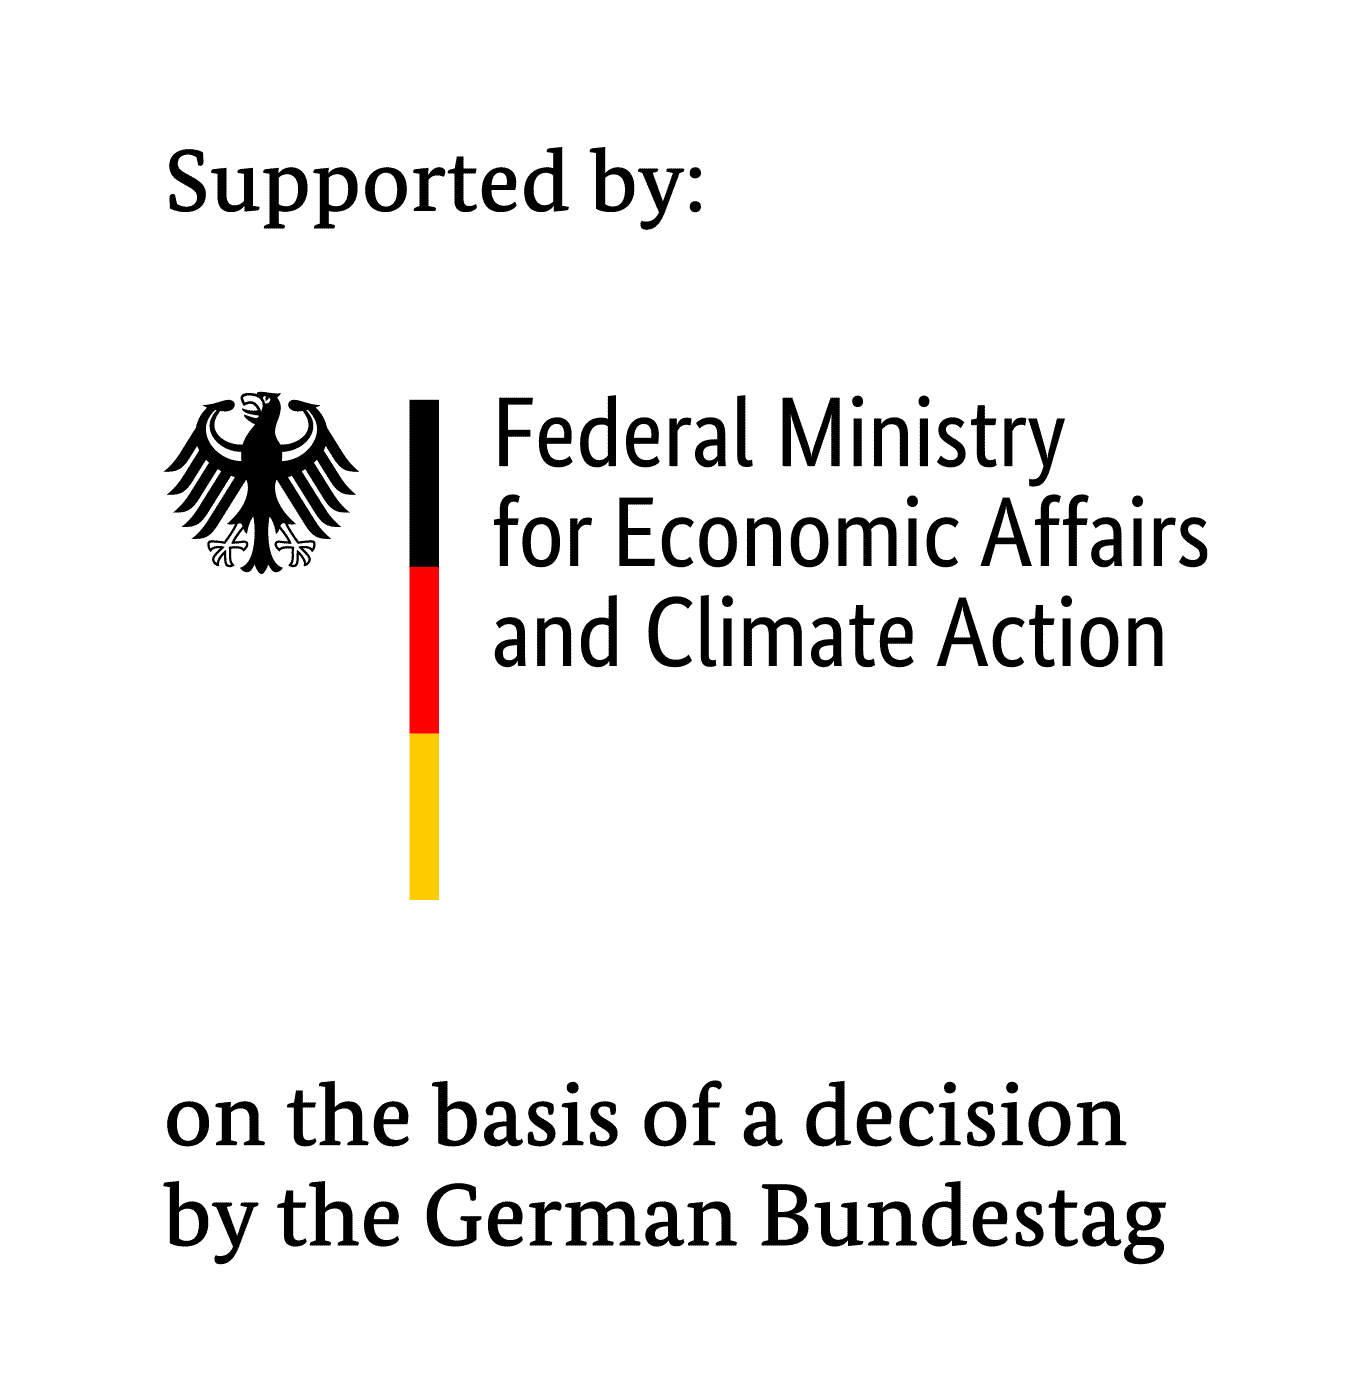 Federal Ministry for Economic Affairs and Climate Action